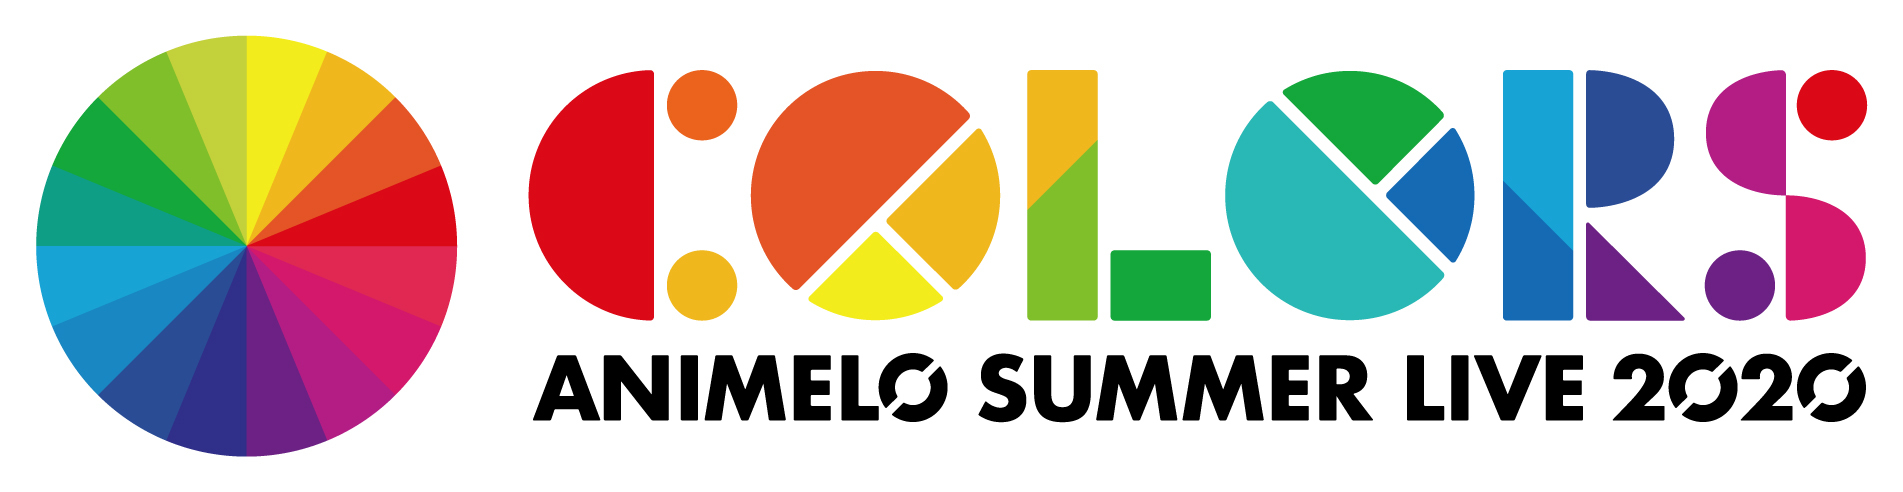 『Animelo Summer Live 2020 -COLORS-』ロゴ